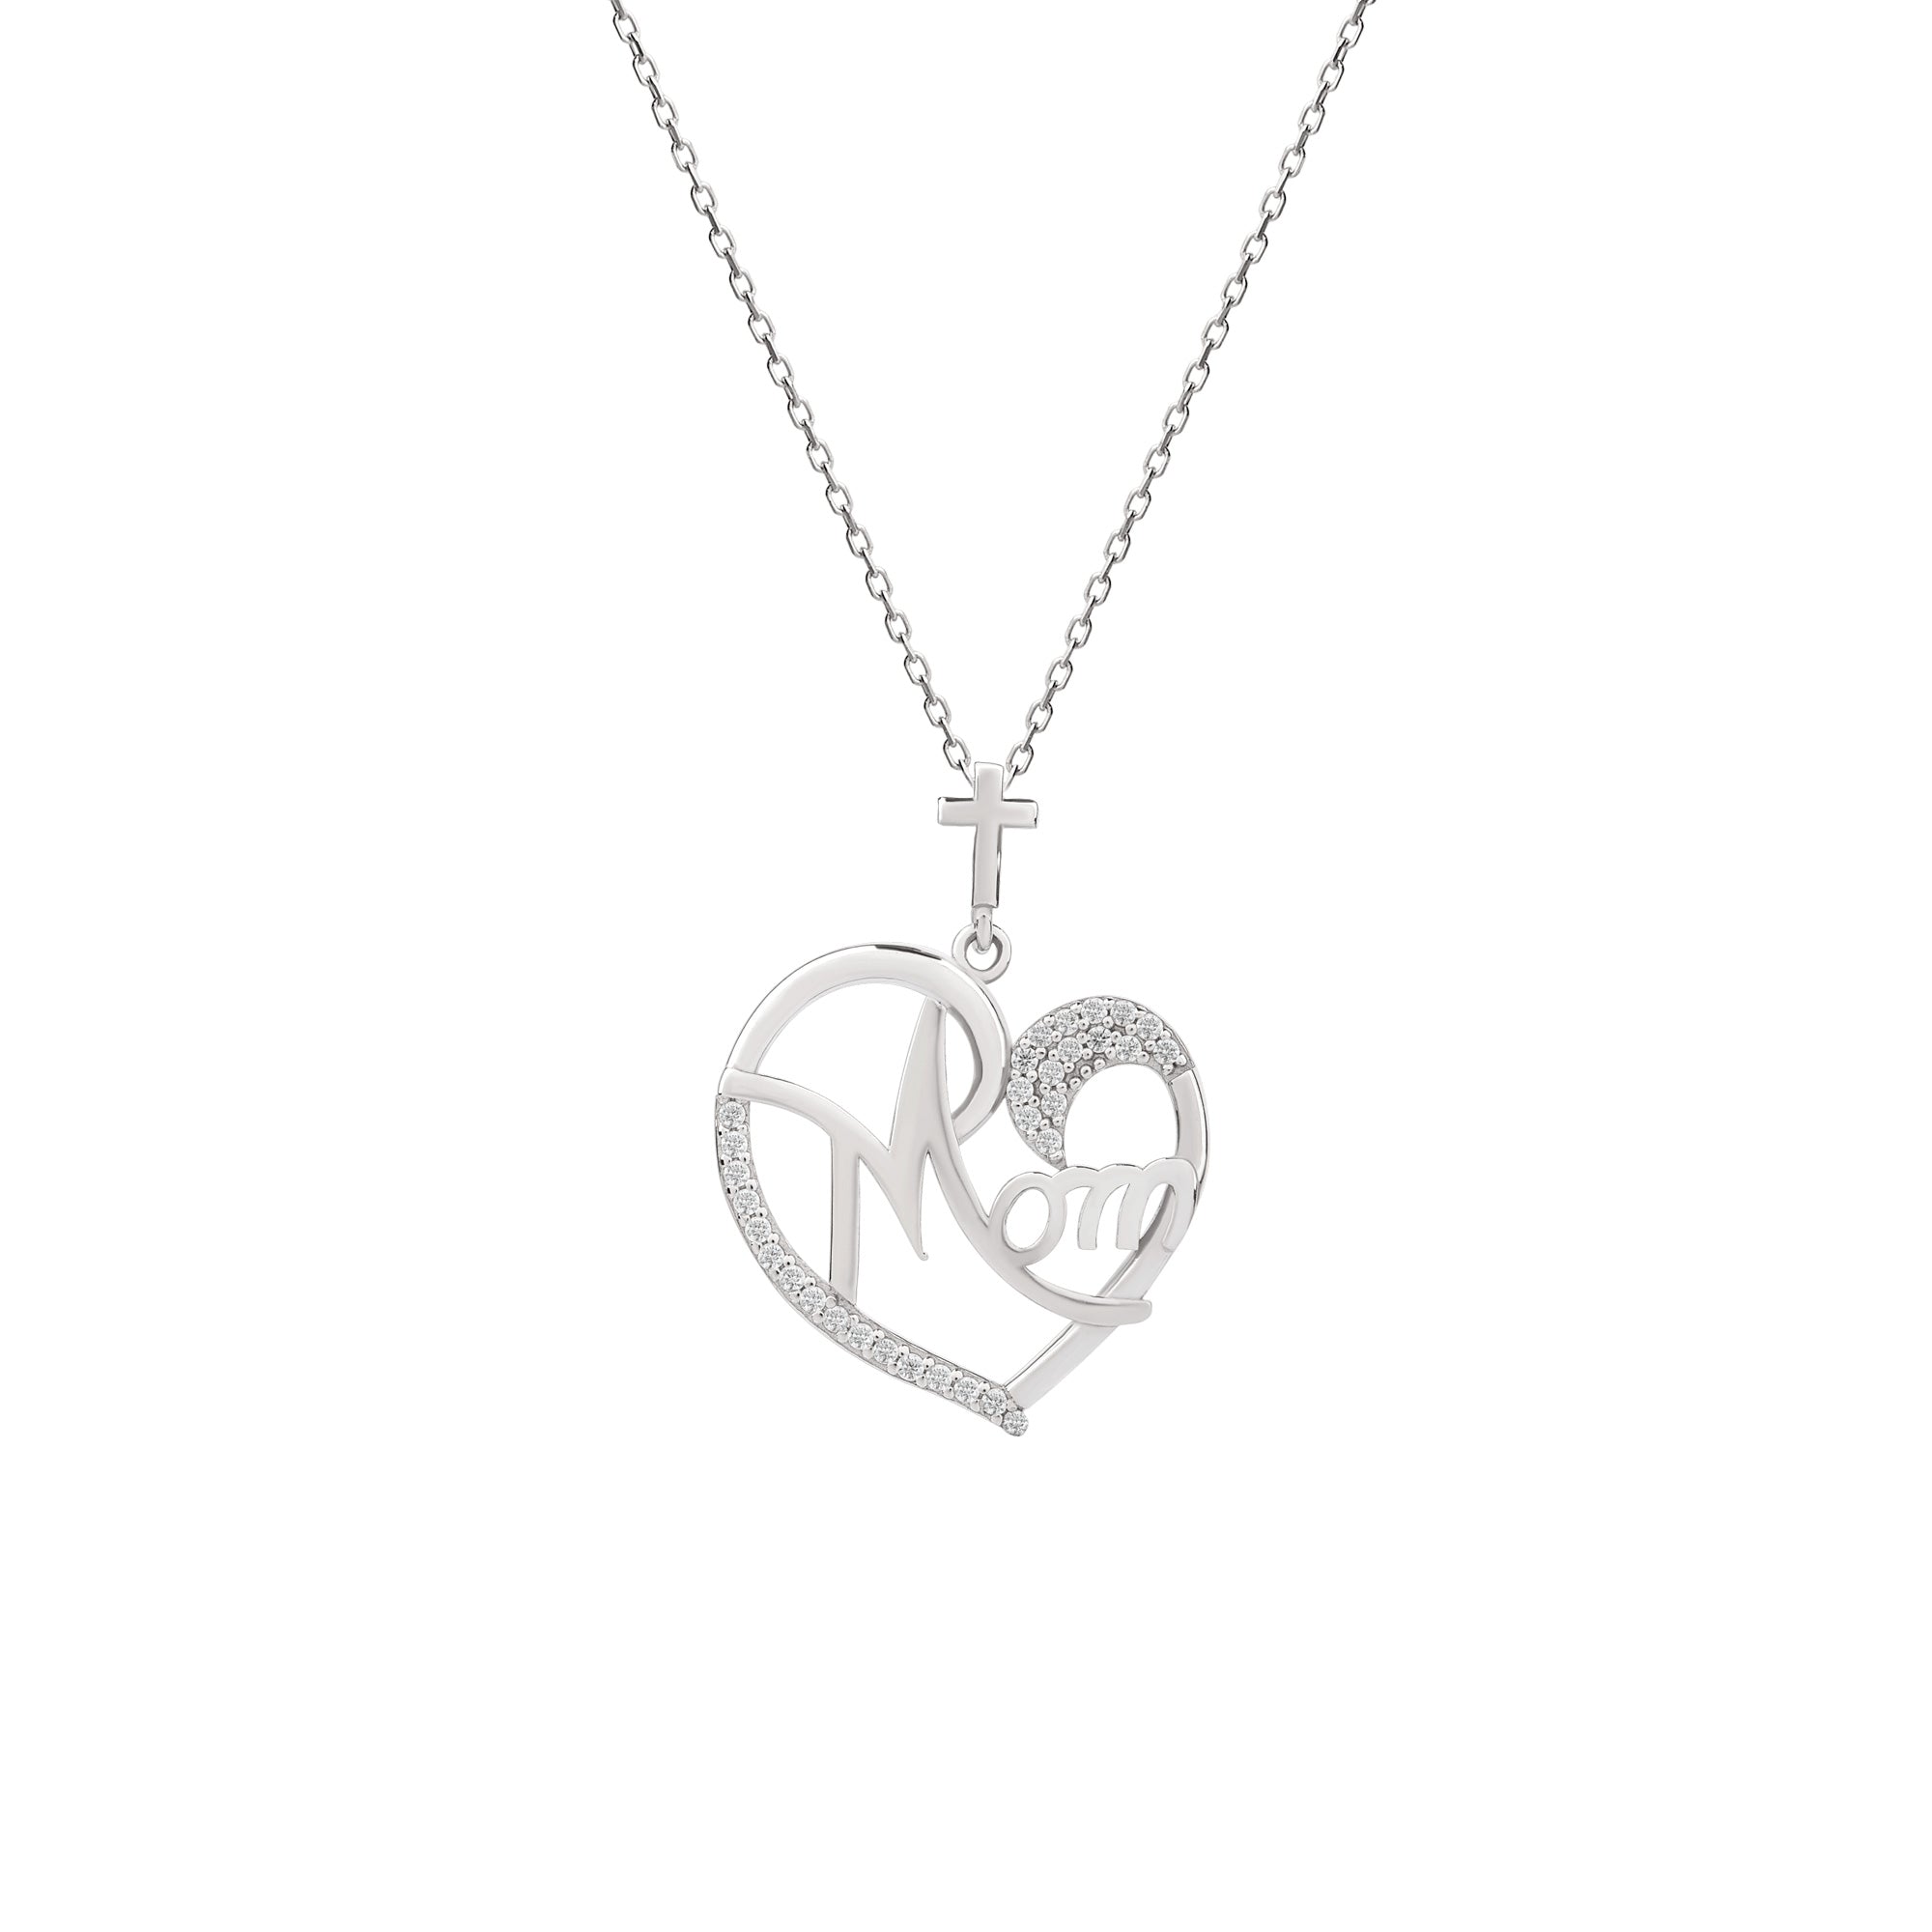 Mom Swirl Heart with Cubic Zirconia Accents and Cross Sterling Silver Pendant